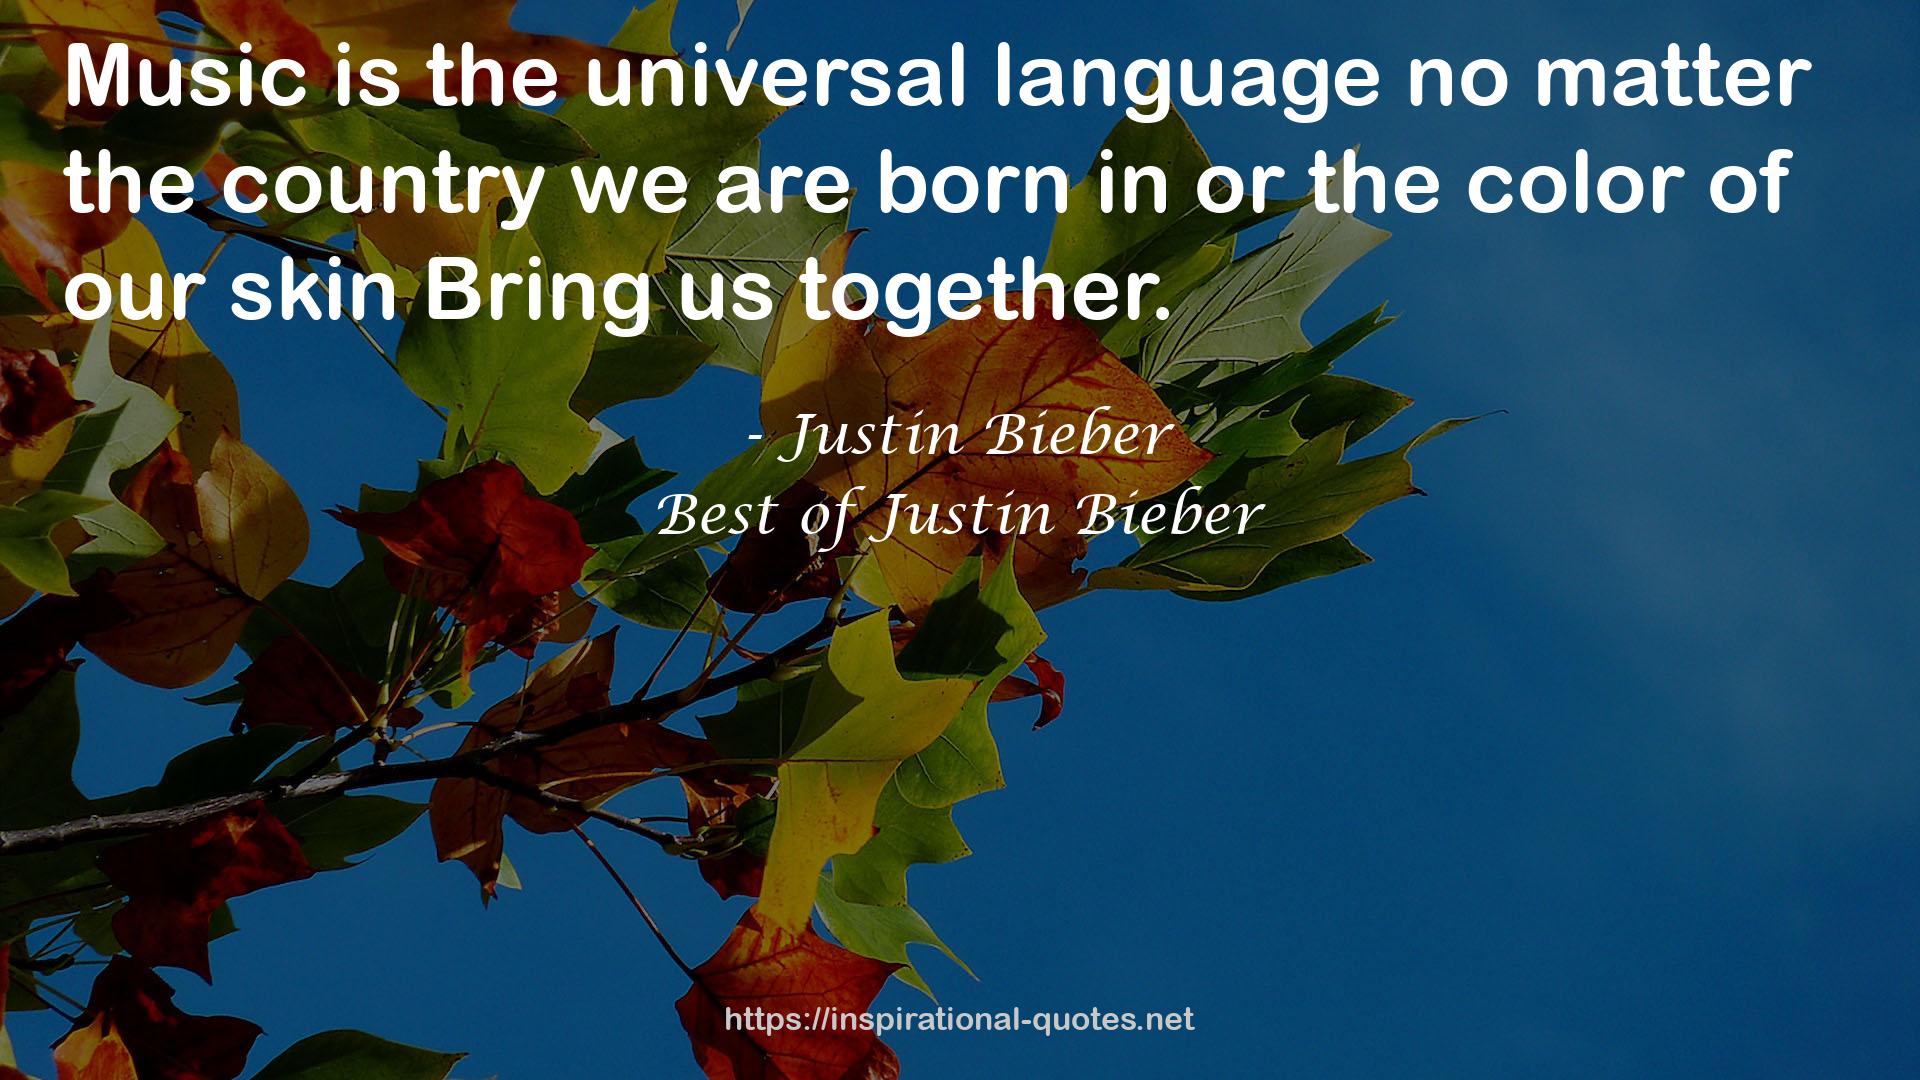 Best of Justin Bieber QUOTES